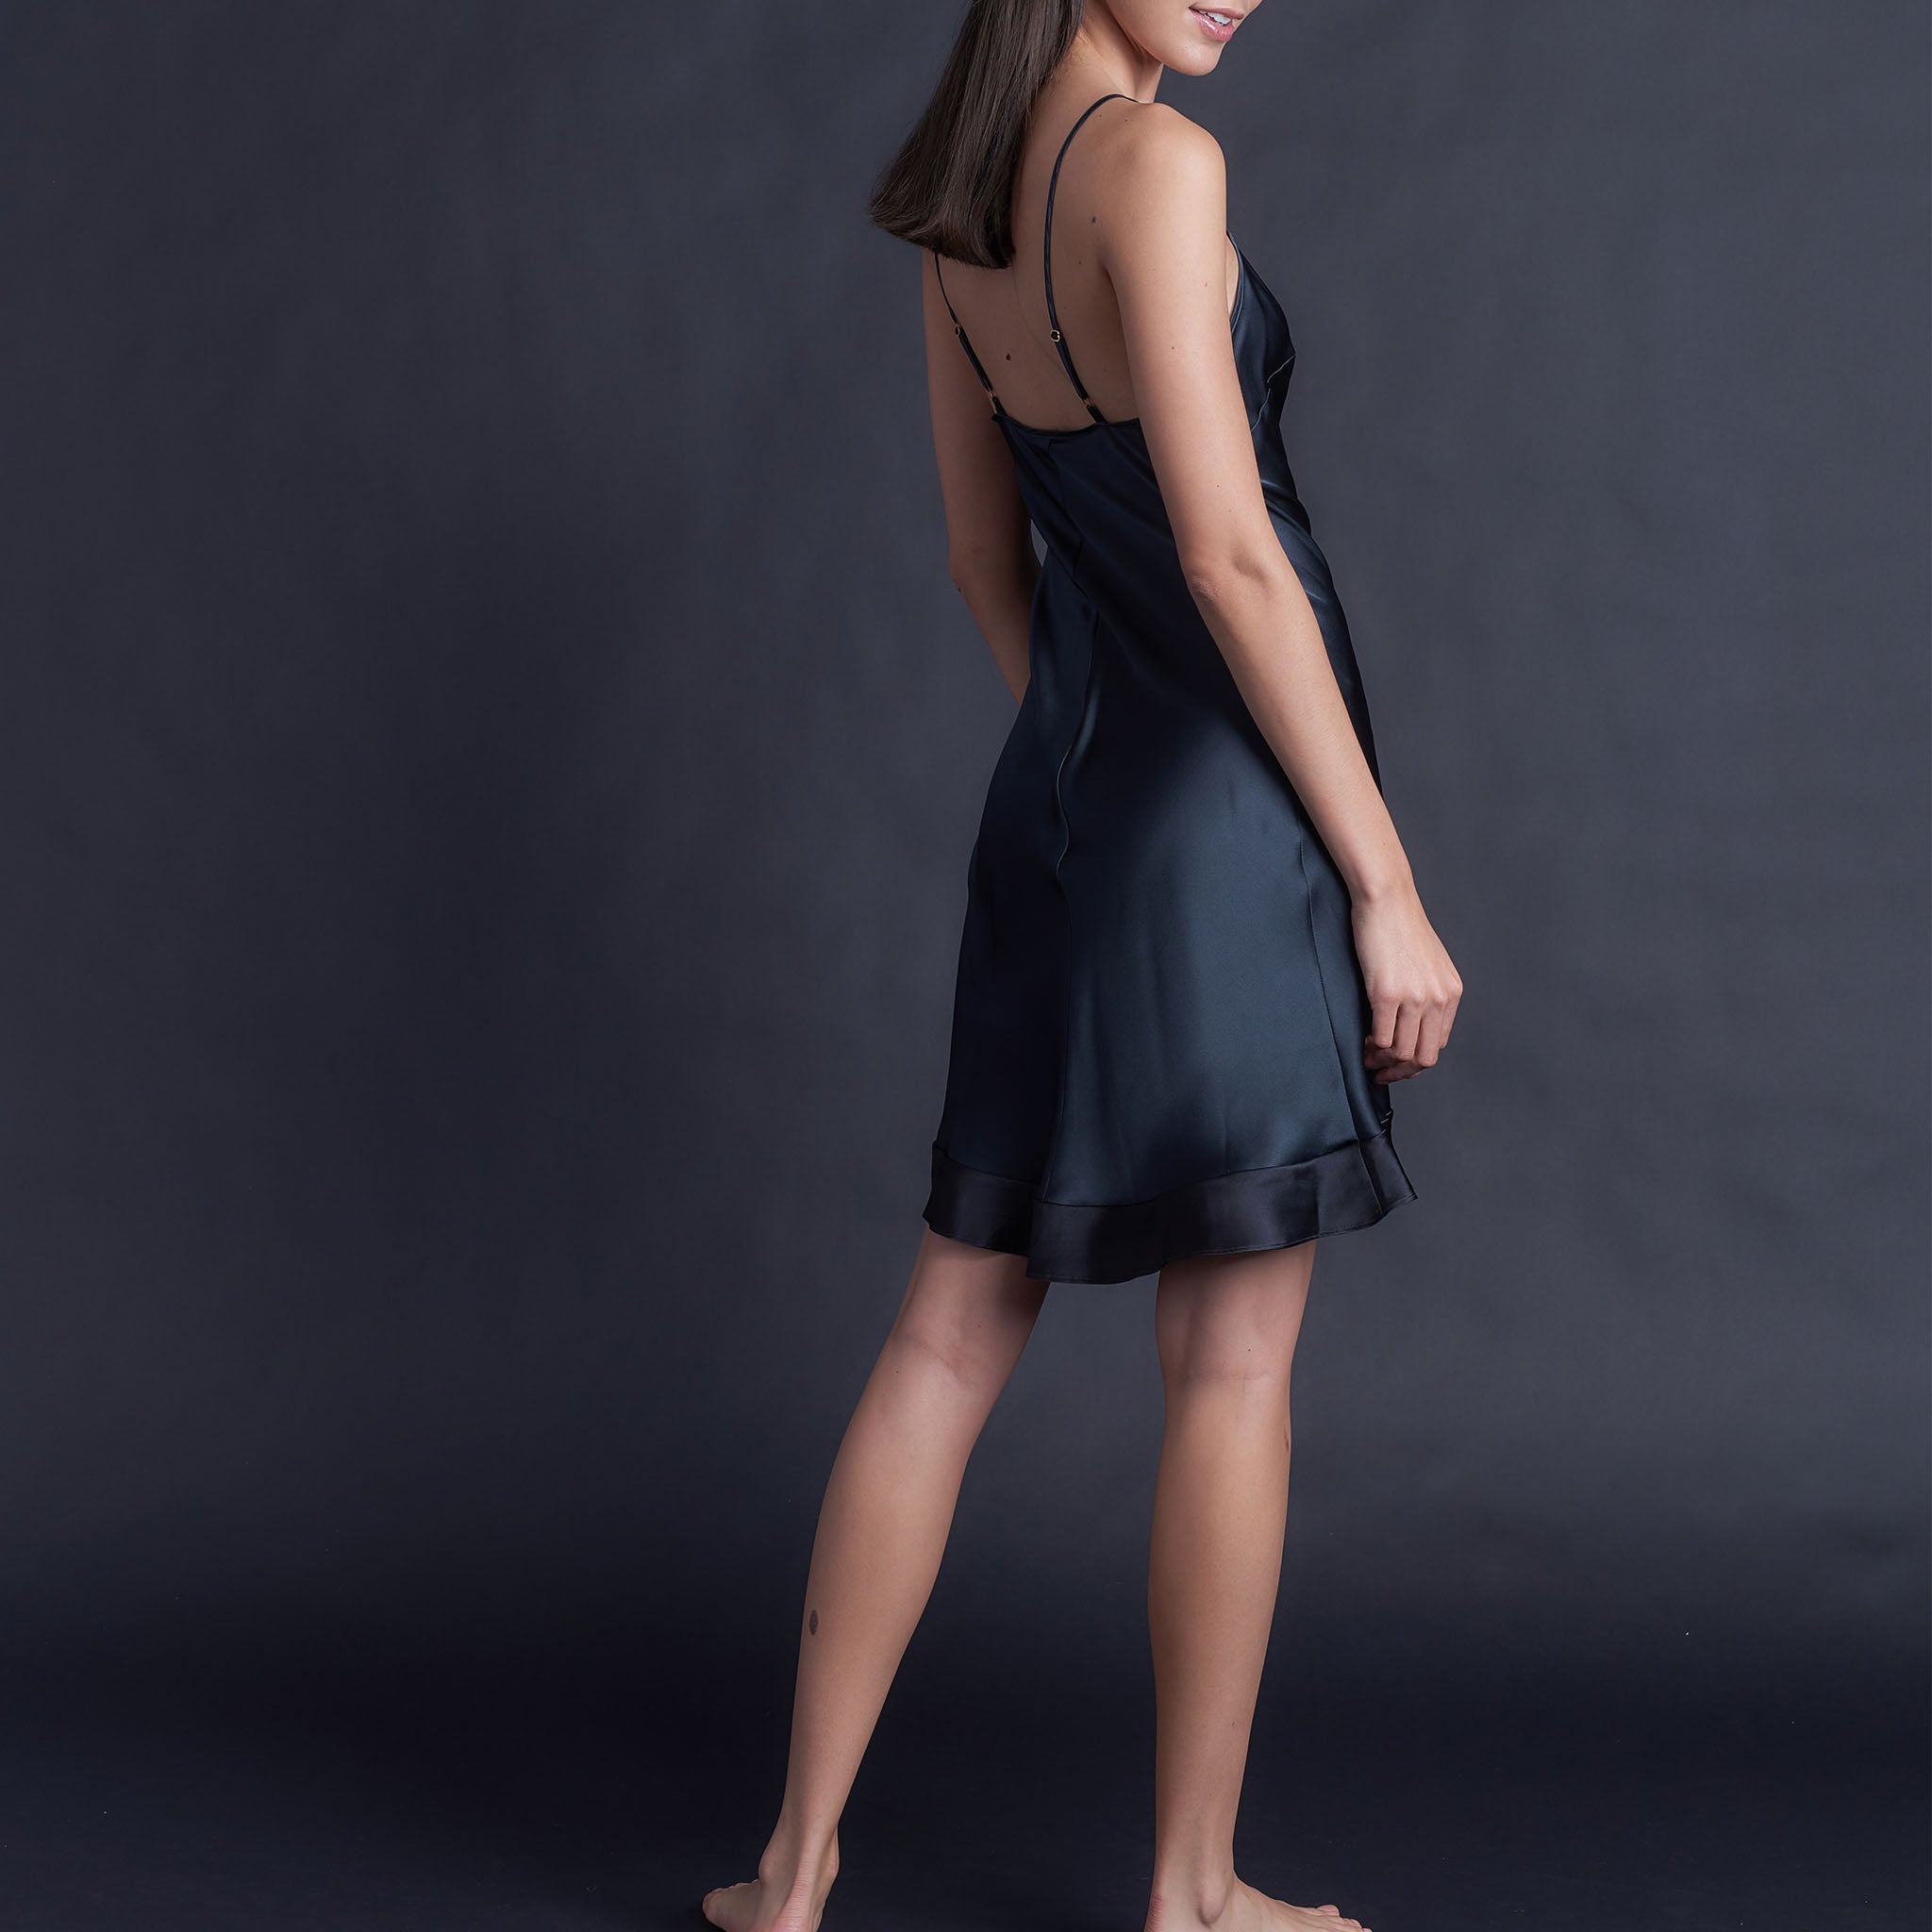 Athena Mid Length Slip Dress in Color Block Black and Sapphire Silk Charmeuse